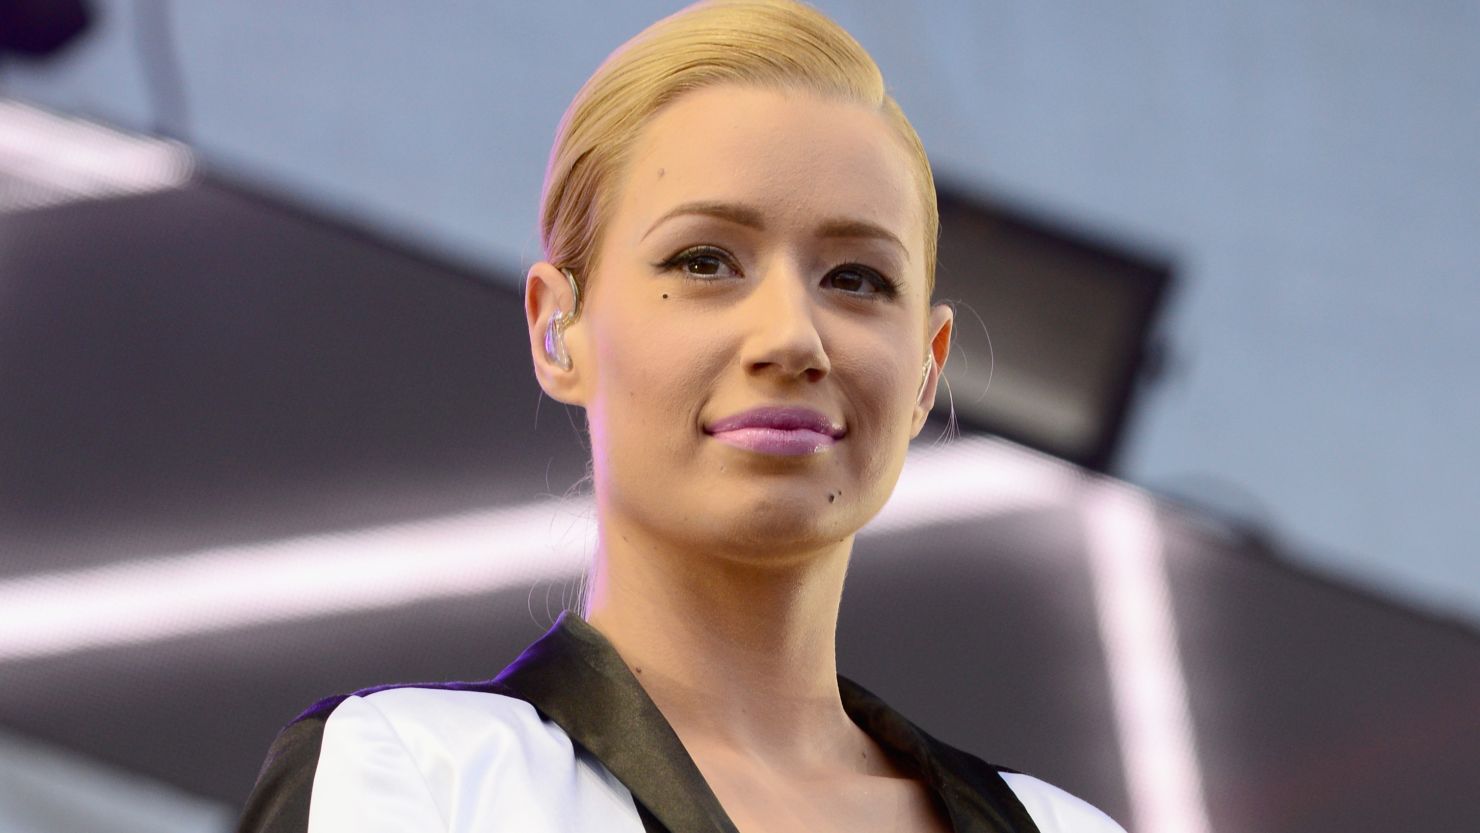 Iggy Azalea, who had the song of the summer in 2014 with her hit "Fancy," leads the 2014 American Music Awards nominees.